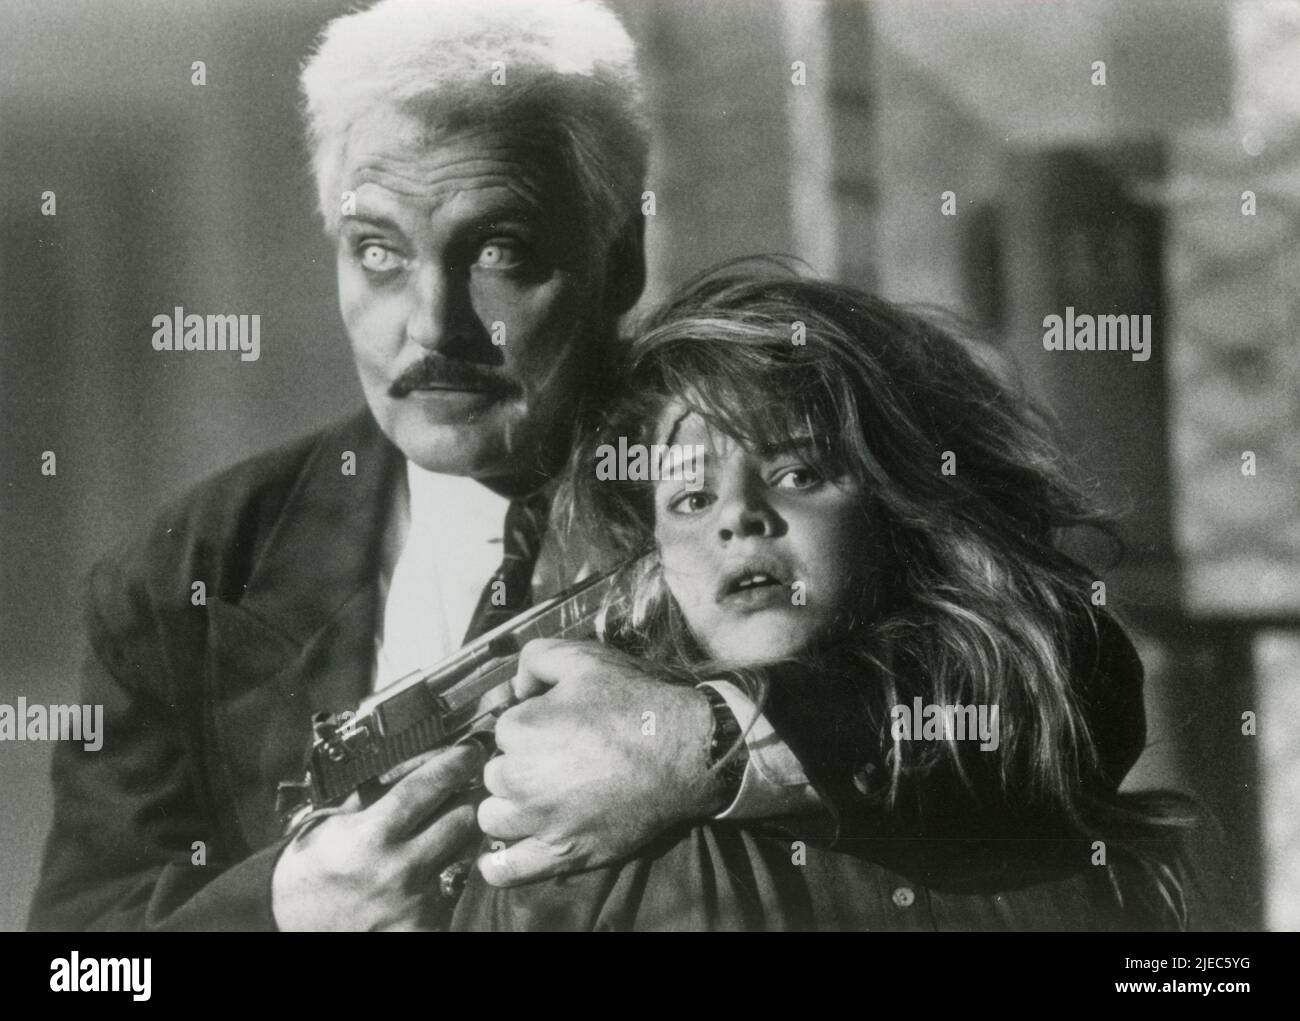 Actor Stacy Keach and actress Traci Lind in the movie Class of 1999, USA 1990 Stock Photo